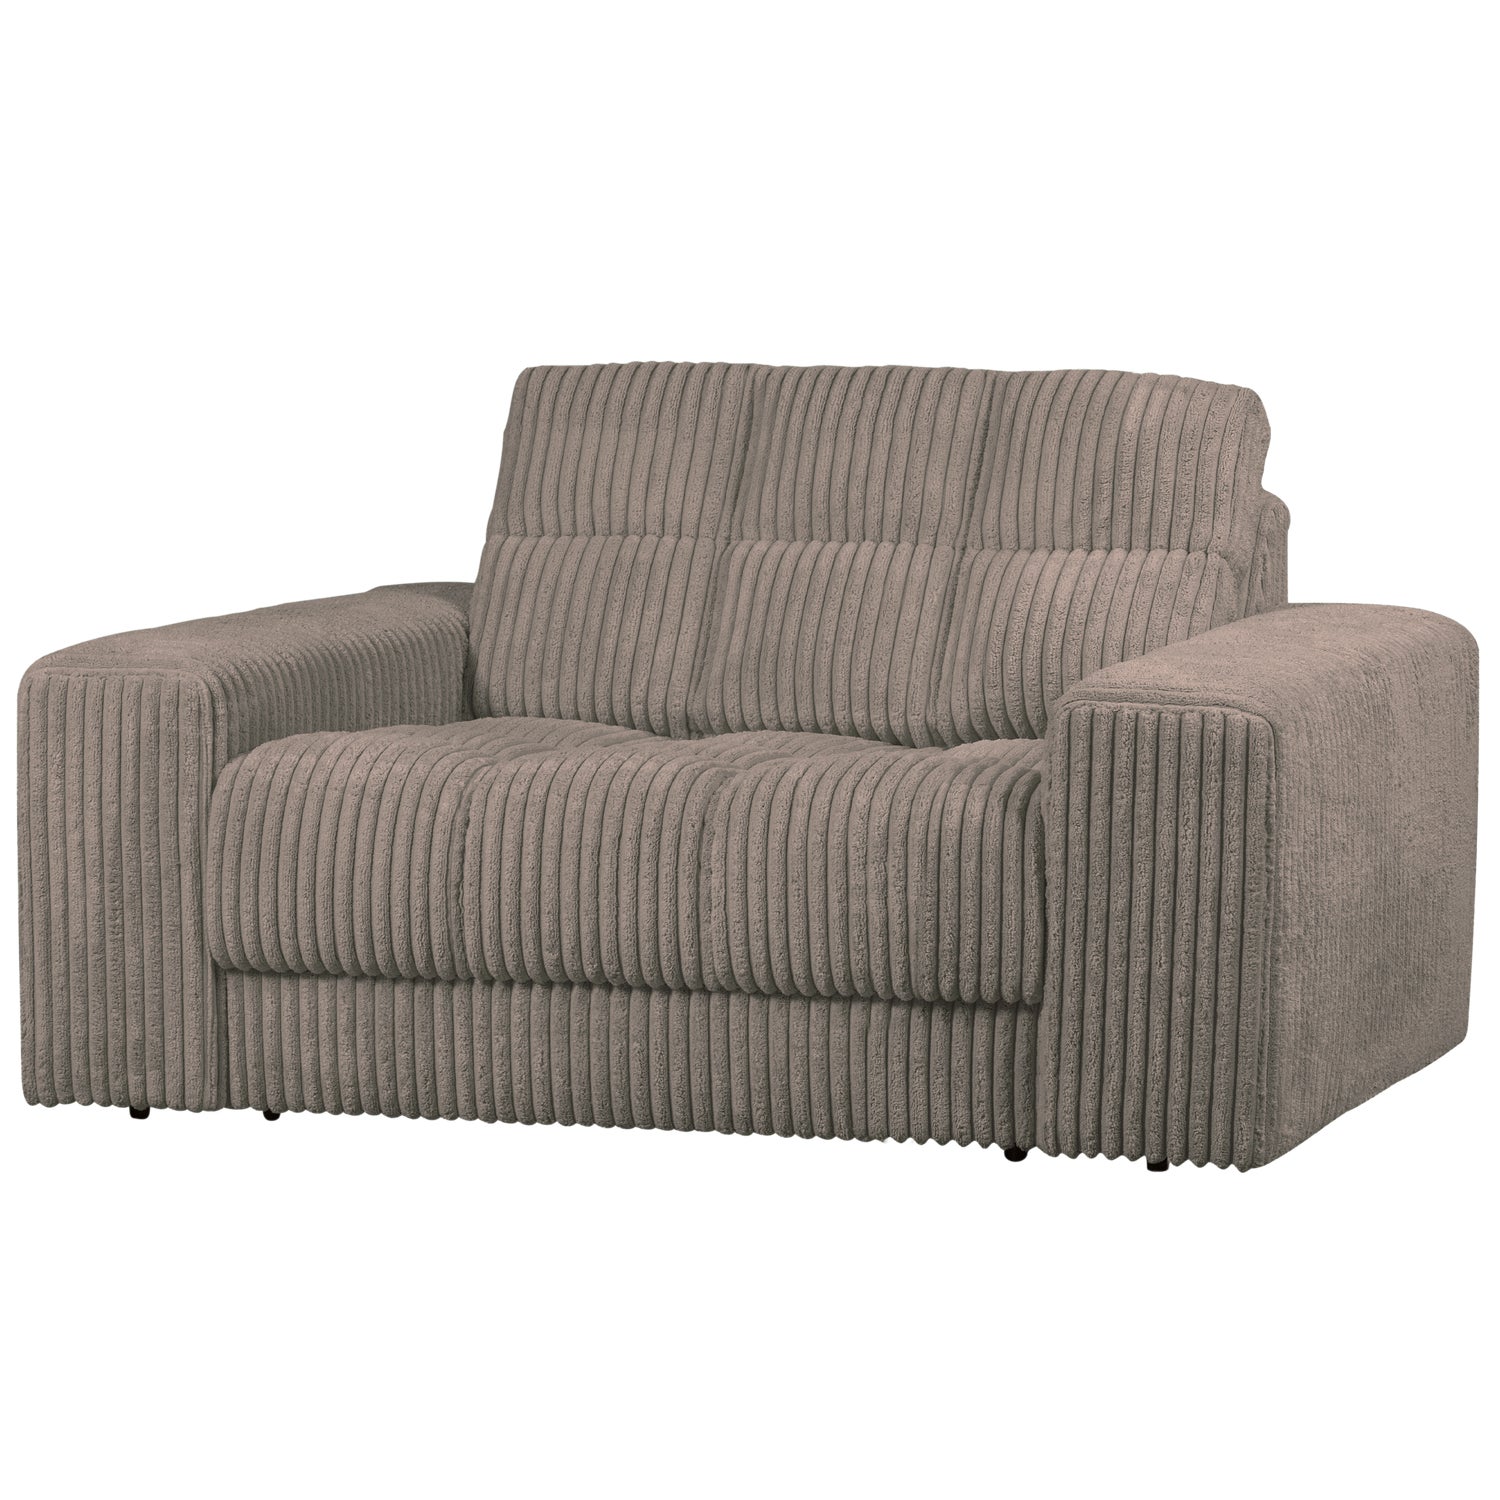 379006-RM-02_VS_WE_Second_date_loveseat_grove_ribstof_mud_SA.png?auto=webp&format=png&width=1500&height=1500